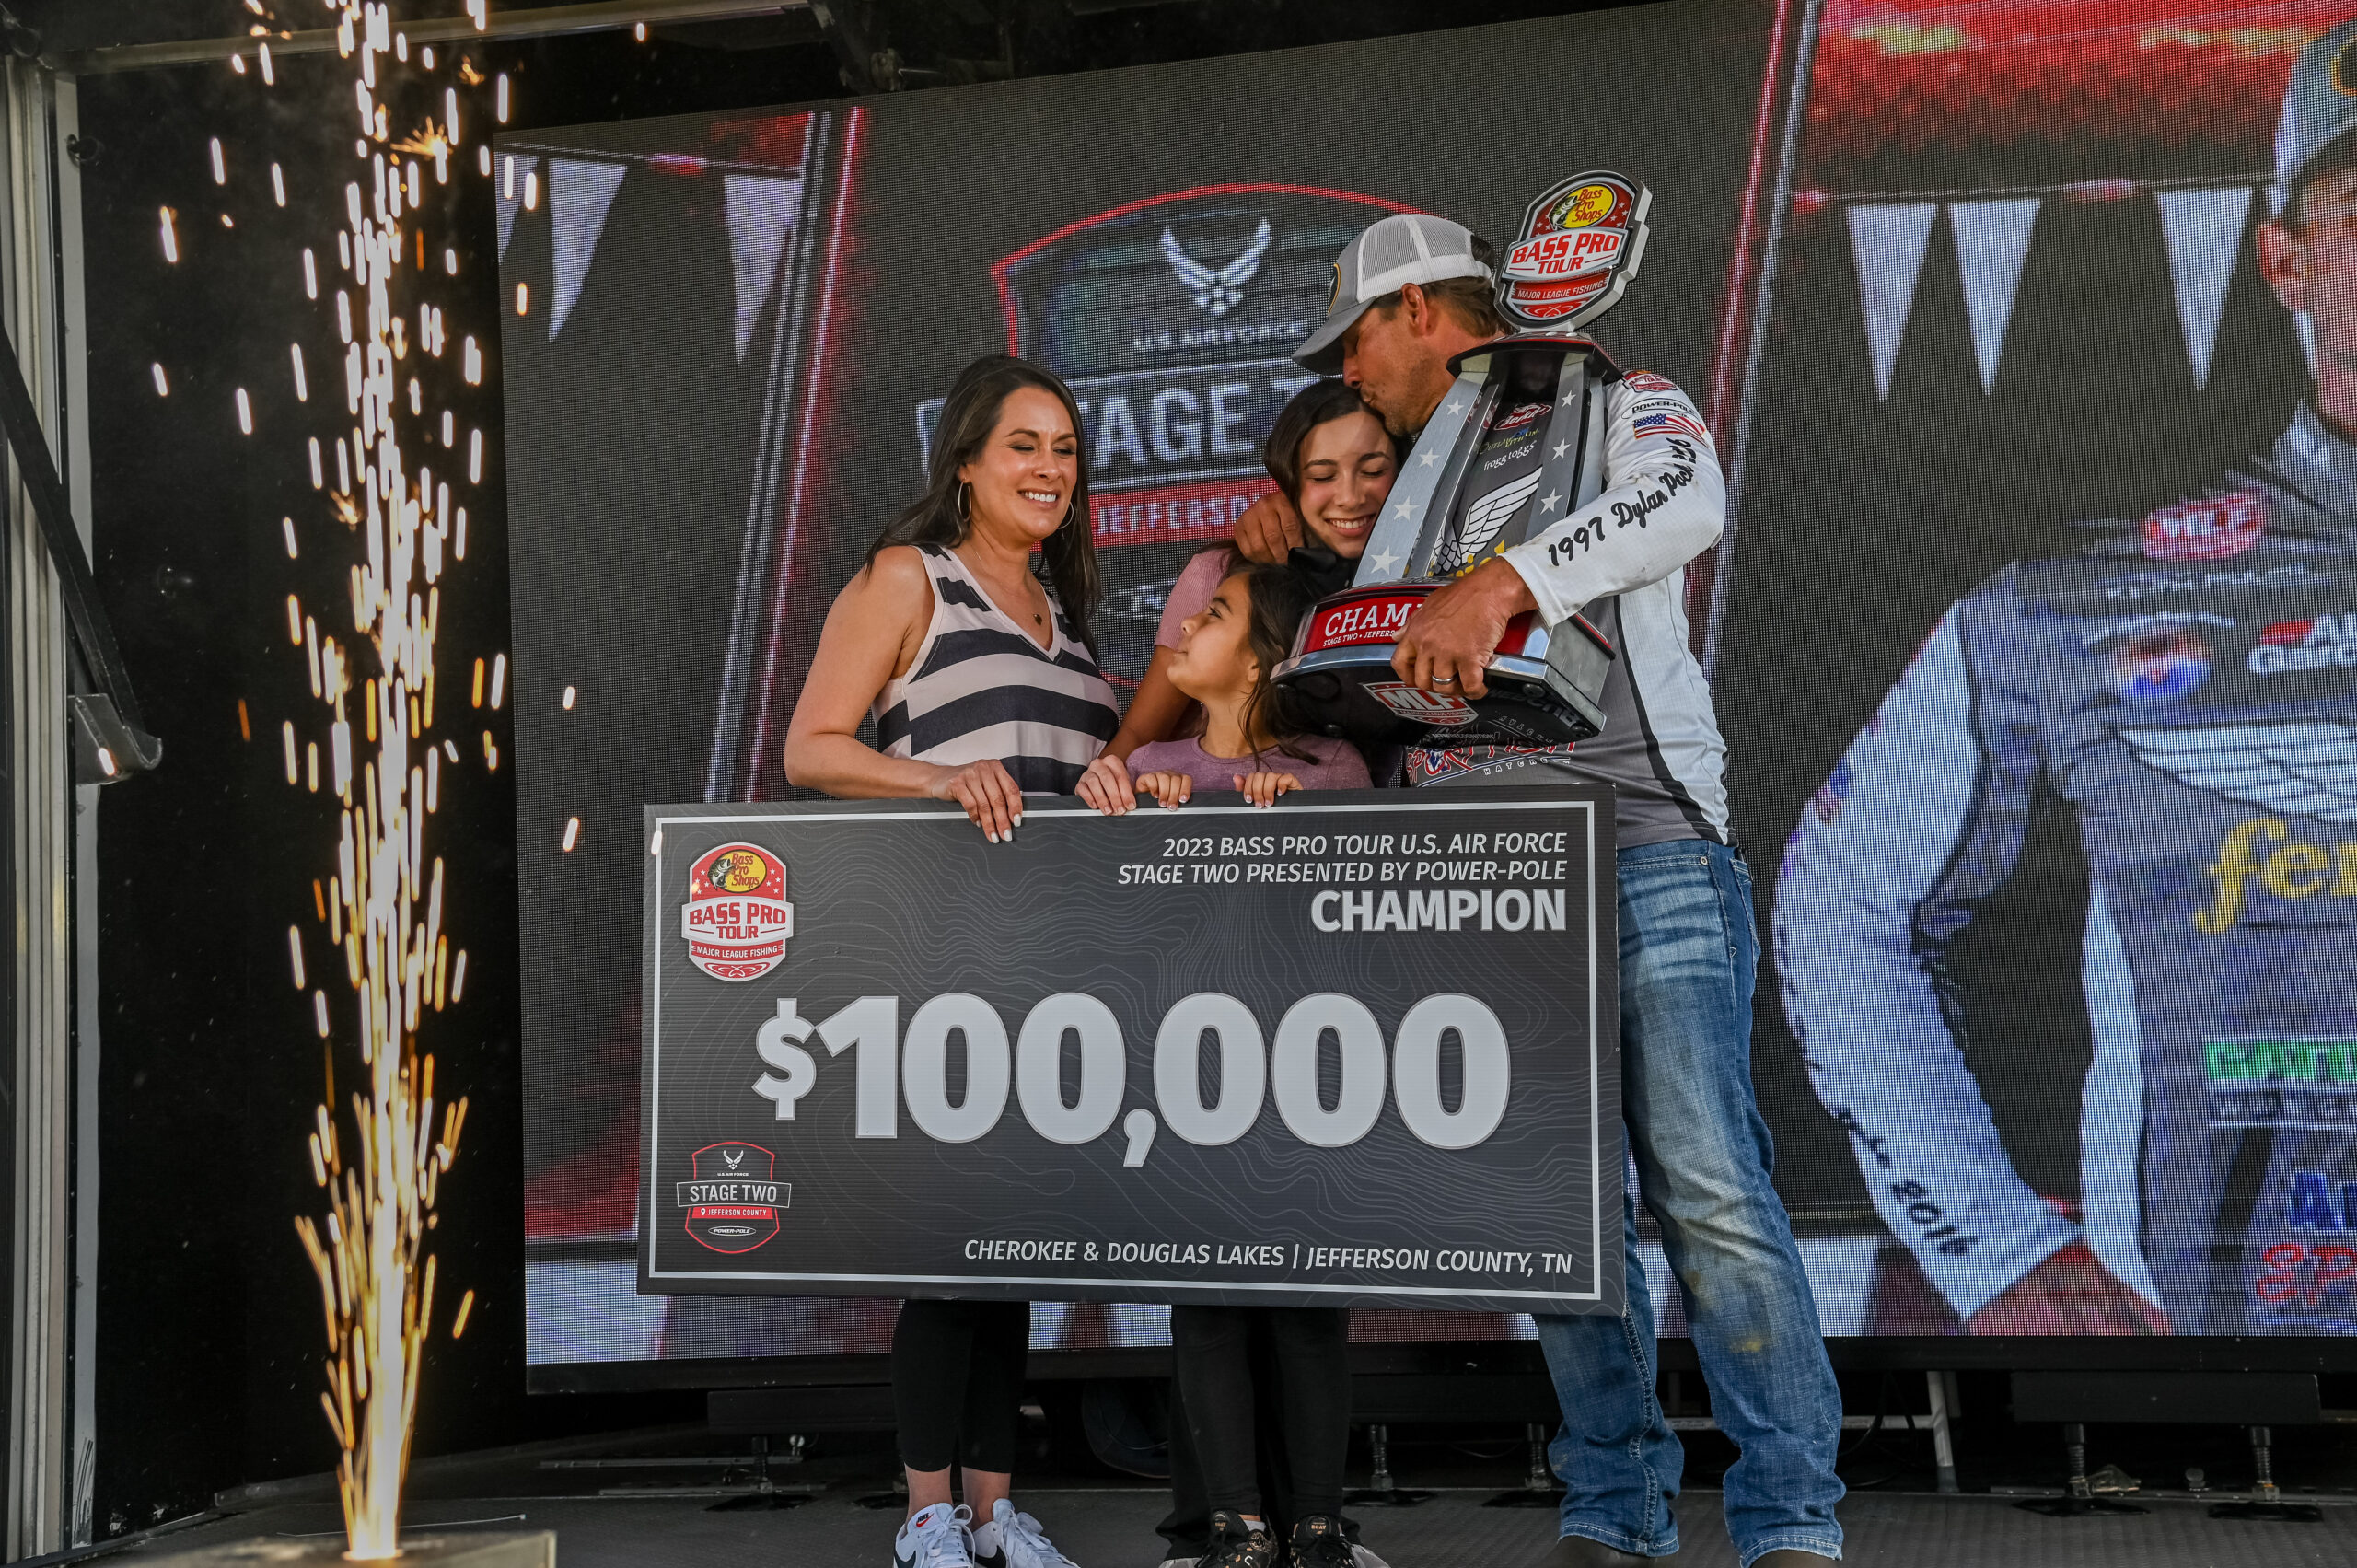 Alabama's Keith Poche earns first Bass Pro Tour victory at U.S.